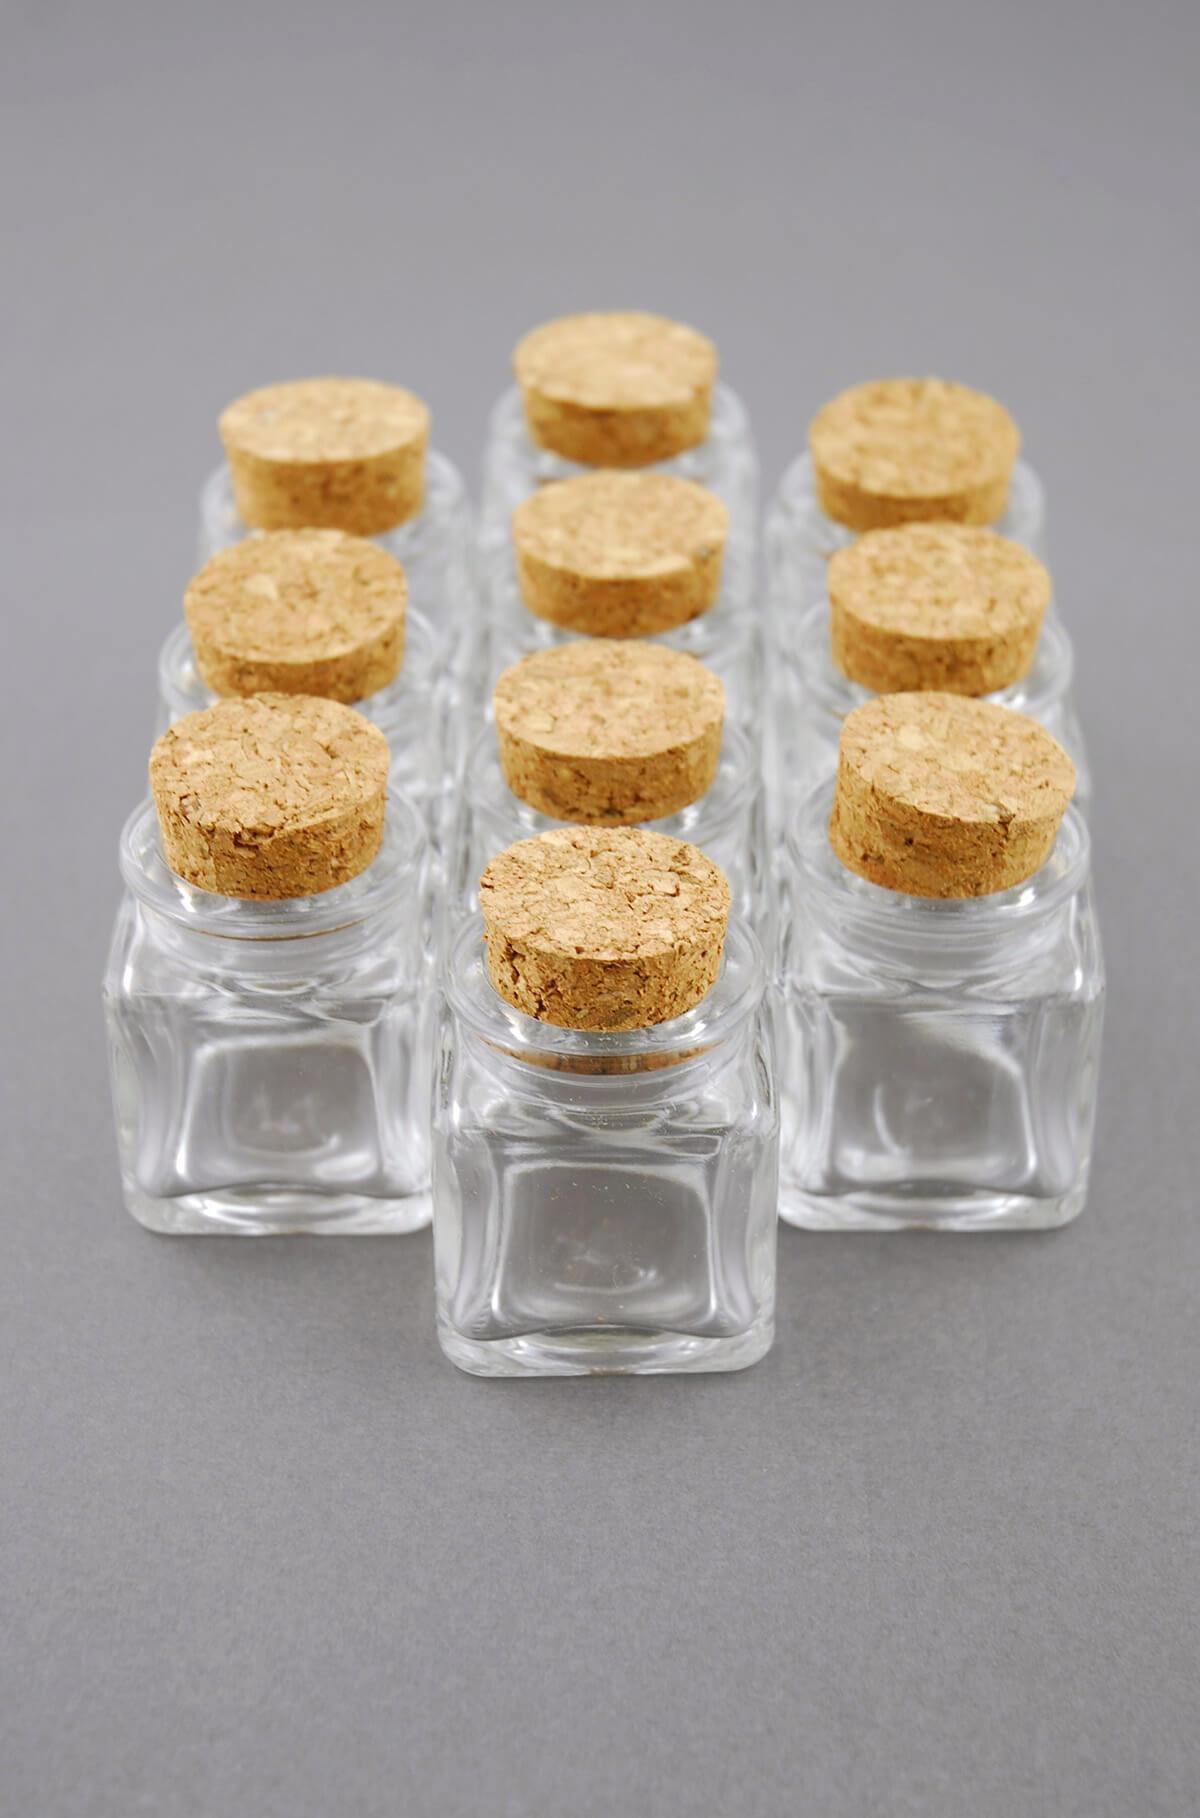 https://cdn.shopify.com/s/files/1/0398/6145/2953/products/mini-glass-bottle-square-with-cork-1_1600x.jpg?v=1689101912